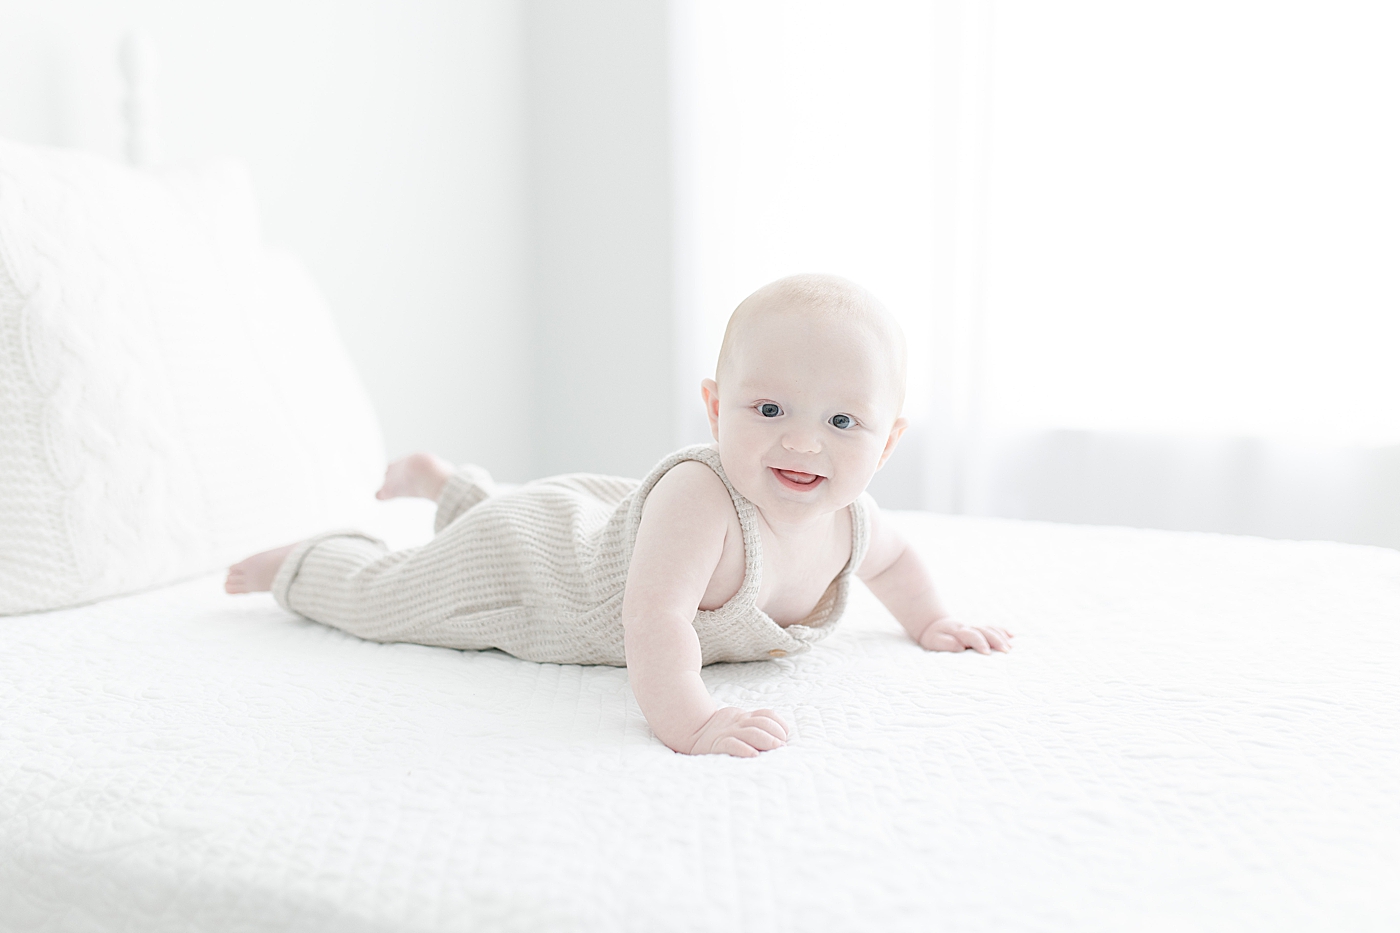 Baby boy wearing knit romper and laying on bed for milestone photoshoot. Photo by Little Sunshine Photography